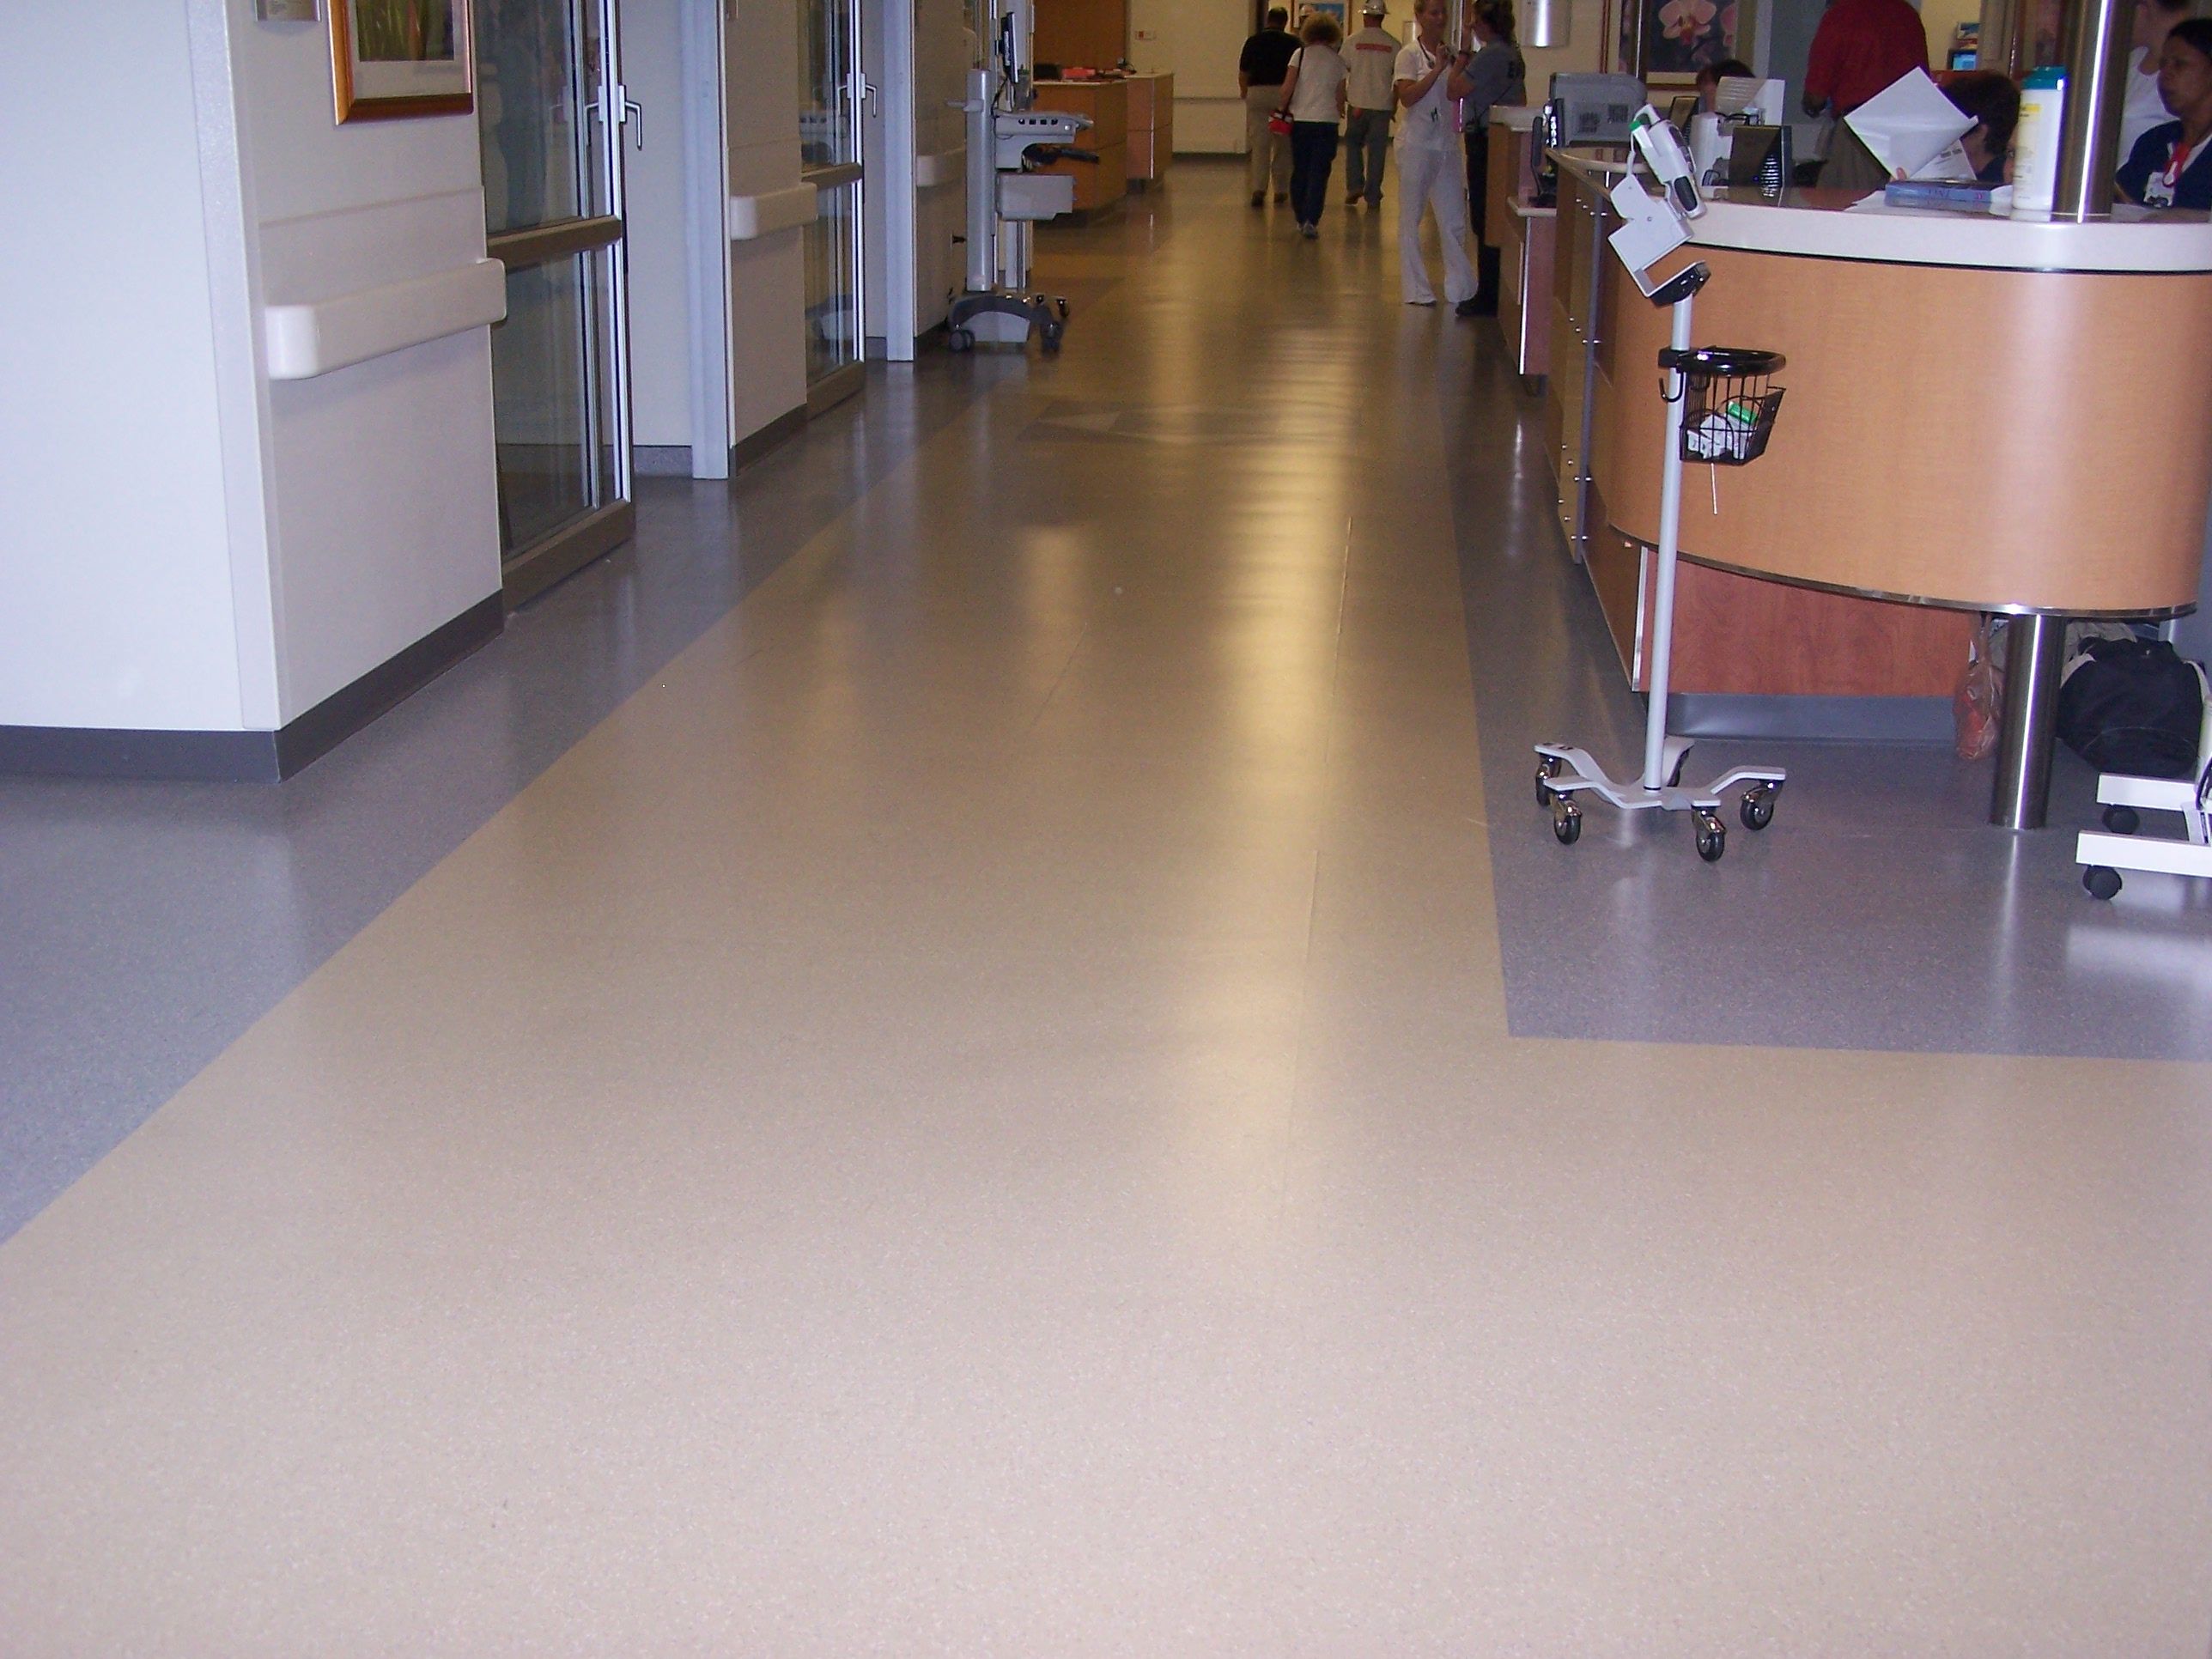 Floors are a superhighways for germs